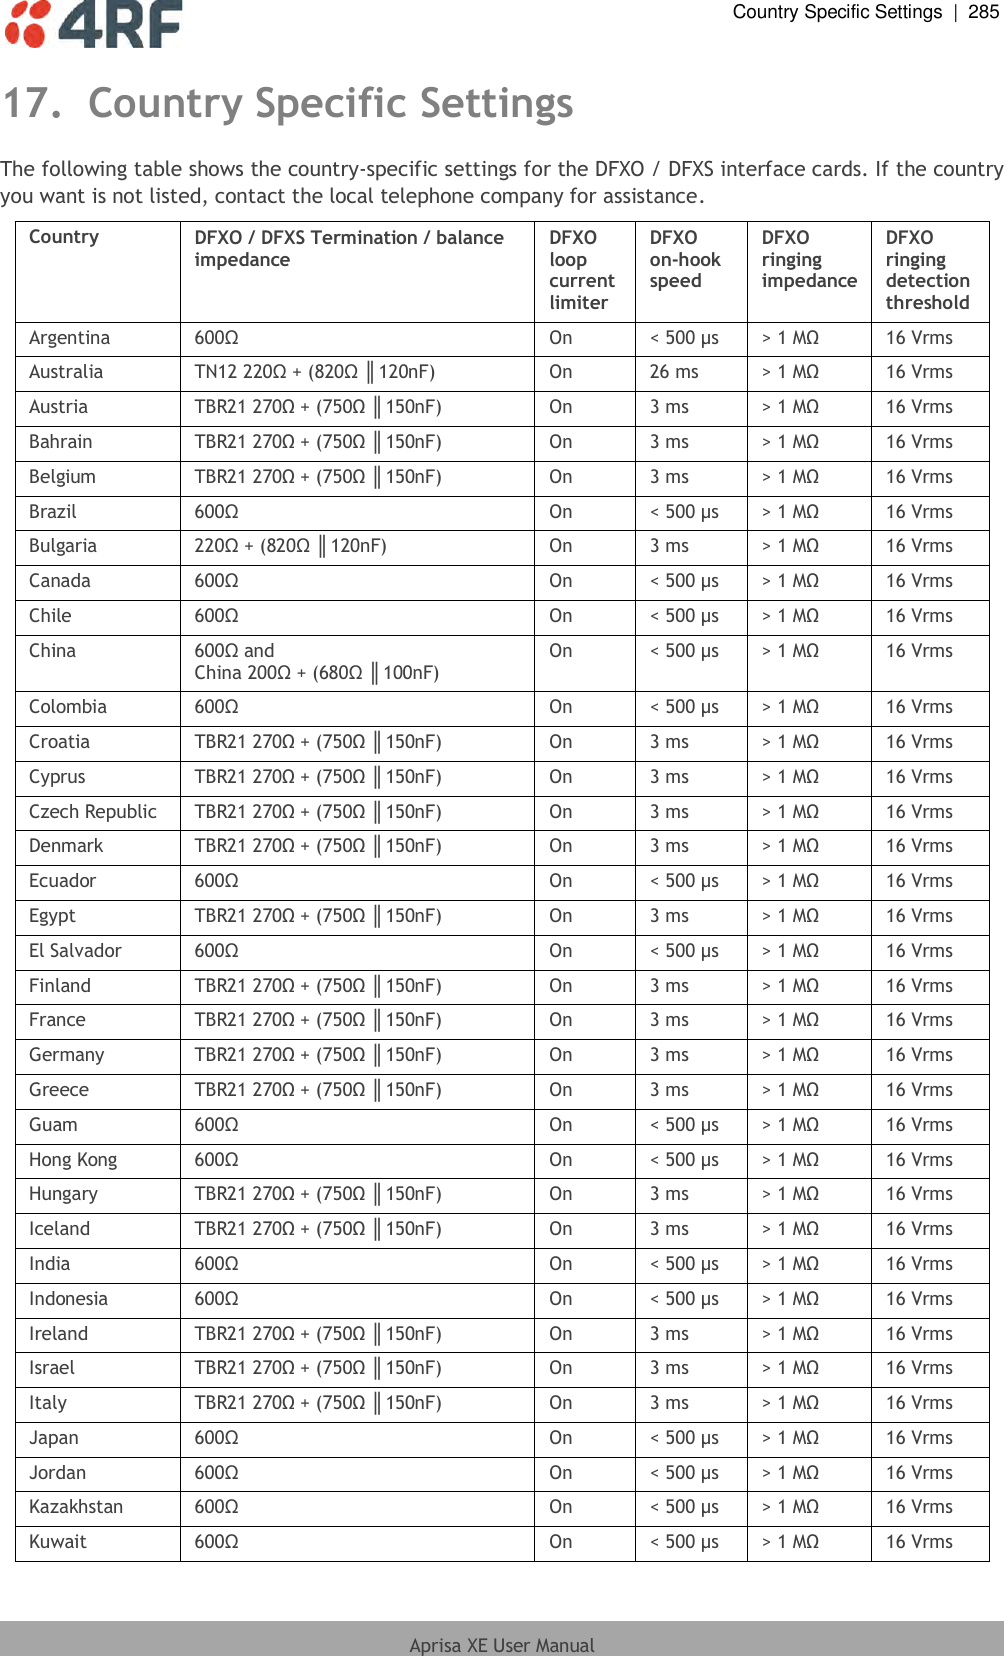  Country Specific Settings  |  285  Aprisa XE User Manual  17. Country Specific Settings The following table shows the country-specific settings for the DFXO / DFXS interface cards. If the country you want is not listed, contact the local telephone company for assistance. Country DFXO / DFXS Termination / balance impedance DFXO loop current limiter DFXO on-hook speed DFXO ringing impedance DFXO ringing detection threshold Argentina 600Ω On &lt; 500 μs &gt; 1 MΩ 16 Vrms Australia TN12 220Ω + (820Ω ║ 120nF) On 26 ms &gt; 1 MΩ 16 Vrms Austria TBR21 270Ω + (750Ω ║ 150nF) On 3 ms &gt; 1 MΩ 16 Vrms Bahrain TBR21 270Ω + (750Ω ║ 150nF) On 3 ms &gt; 1 MΩ 16 Vrms Belgium TBR21 270Ω + (750Ω ║ 150nF) On 3 ms &gt; 1 MΩ 16 Vrms Brazil 600Ω On &lt; 500 μs &gt; 1 MΩ 16 Vrms Bulgaria 220Ω + (820Ω ║ 120nF) On 3 ms &gt; 1 MΩ 16 Vrms Canada 600Ω On &lt; 500 μs &gt; 1 MΩ 16 Vrms Chile 600Ω On &lt; 500 μs &gt; 1 MΩ 16 Vrms China 600Ω and China 200Ω + (680Ω ║ 100nF) On &lt; 500 μs &gt; 1 MΩ 16 Vrms Colombia 600Ω On &lt; 500 μs &gt; 1 MΩ 16 Vrms Croatia  TBR21 270Ω + (750Ω ║ 150nF) On 3 ms &gt; 1 MΩ 16 Vrms Cyprus TBR21 270Ω + (750Ω ║ 150nF) On 3 ms &gt; 1 MΩ 16 Vrms Czech Republic TBR21 270Ω + (750Ω ║ 150nF) On 3 ms &gt; 1 MΩ 16 Vrms Denmark TBR21 270Ω + (750Ω ║ 150nF) On 3 ms &gt; 1 MΩ 16 Vrms Ecuador 600Ω On &lt; 500 μs &gt; 1 MΩ 16 Vrms Egypt TBR21 270Ω + (750Ω ║ 150nF) On 3 ms &gt; 1 MΩ 16 Vrms El Salvador  600Ω On &lt; 500 μs &gt; 1 MΩ 16 Vrms Finland TBR21 270Ω + (750Ω ║ 150nF) On 3 ms &gt; 1 MΩ 16 Vrms France TBR21 270Ω + (750Ω ║ 150nF) On 3 ms &gt; 1 MΩ 16 Vrms Germany TBR21 270Ω + (750Ω ║ 150nF) On 3 ms &gt; 1 MΩ 16 Vrms Greece TBR21 270Ω + (750Ω ║ 150nF) On 3 ms &gt; 1 MΩ 16 Vrms Guam 600Ω On &lt; 500 μs &gt; 1 MΩ 16 Vrms Hong Kong 600Ω On &lt; 500 μs &gt; 1 MΩ 16 Vrms Hungary TBR21 270Ω + (750Ω ║ 150nF) On 3 ms &gt; 1 MΩ 16 Vrms Iceland TBR21 270Ω + (750Ω ║ 150nF) On 3 ms &gt; 1 MΩ 16 Vrms India  600Ω On &lt; 500 μs &gt; 1 MΩ 16 Vrms Indonesia  600Ω On &lt; 500 μs &gt; 1 MΩ 16 Vrms Ireland  TBR21 270Ω + (750Ω ║ 150nF) On 3 ms &gt; 1 MΩ 16 Vrms Israel  TBR21 270Ω + (750Ω ║ 150nF) On 3 ms &gt; 1 MΩ 16 Vrms Italy  TBR21 270Ω + (750Ω ║ 150nF) On 3 ms &gt; 1 MΩ 16 Vrms Japan  600Ω On &lt; 500 μs &gt; 1 MΩ 16 Vrms Jordan  600Ω On &lt; 500 μs &gt; 1 MΩ 16 Vrms Kazakhstan  600Ω On &lt; 500 μs &gt; 1 MΩ 16 Vrms Kuwait  600Ω On &lt; 500 μs &gt; 1 MΩ 16 Vrms 